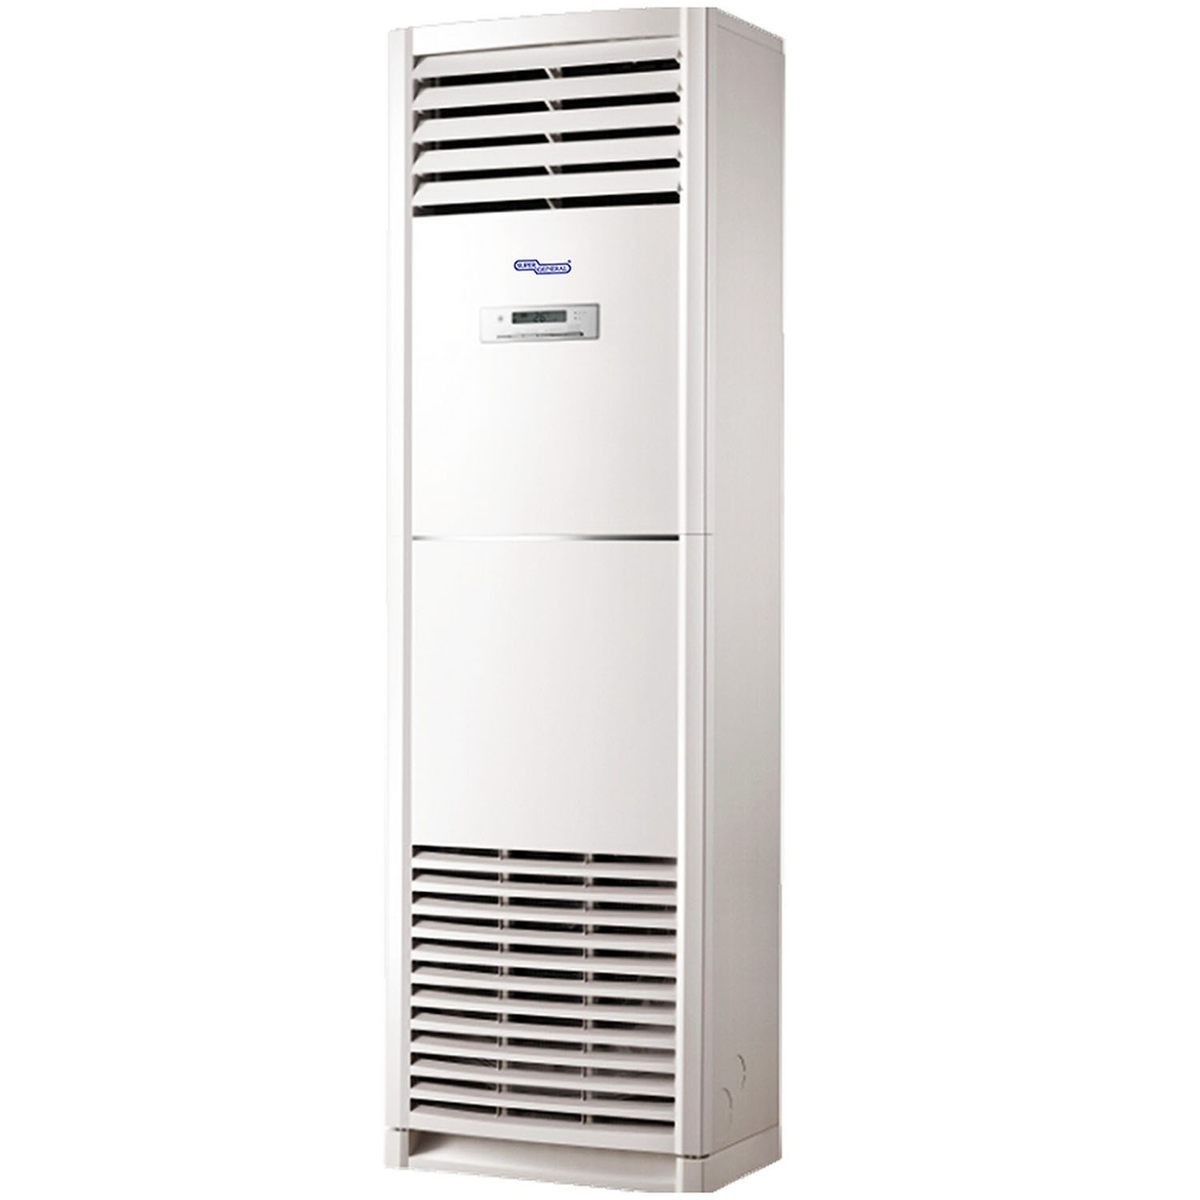 Buy Super General Floor Standing Air Conditioner Sgfs48he 4ton